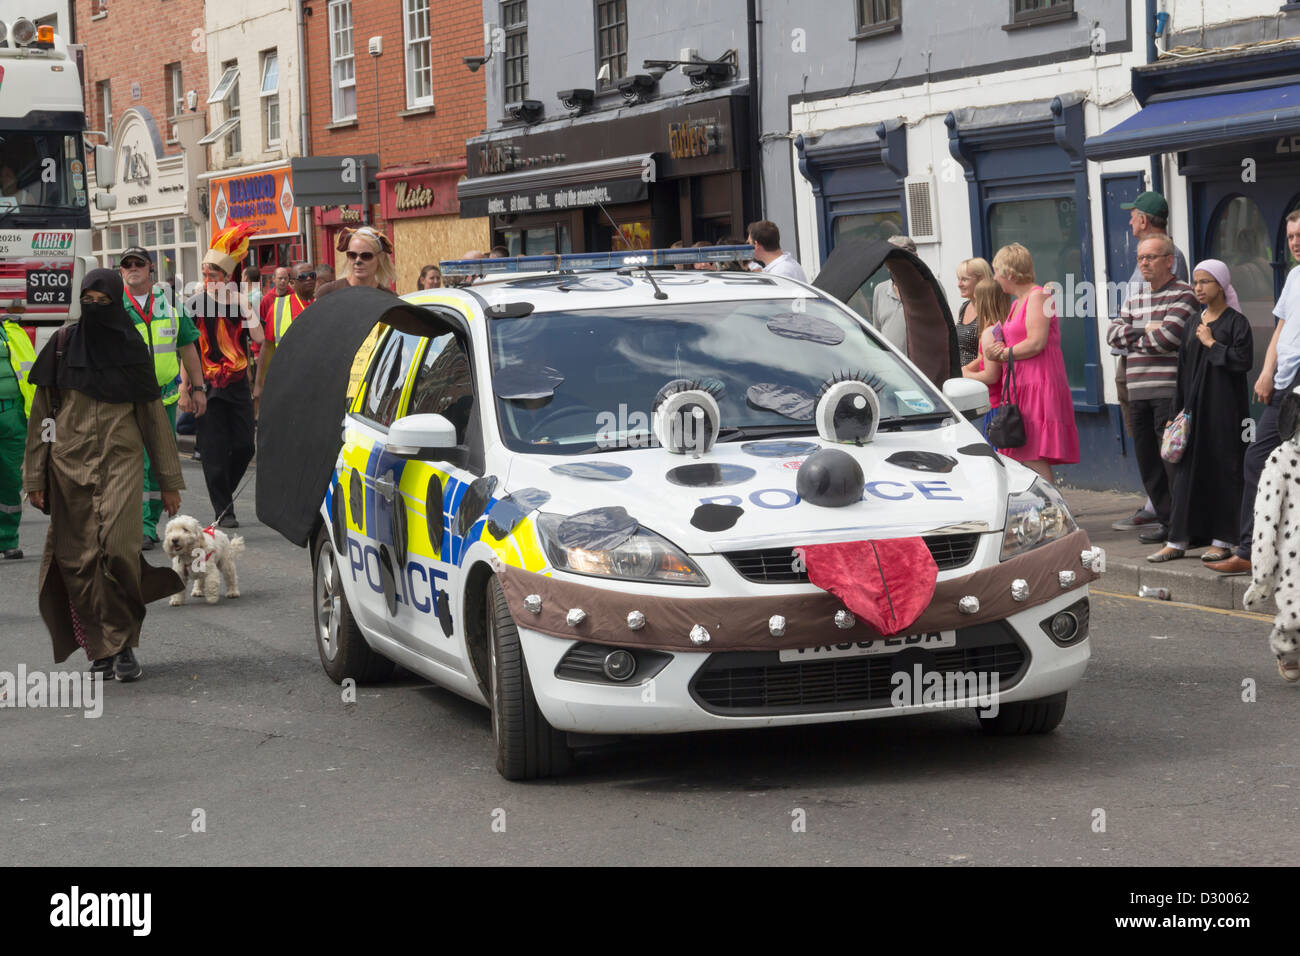 Police car decorated to represent a police dog, taking part in the Gloucester Carnival 2012 procession. Stock Photo